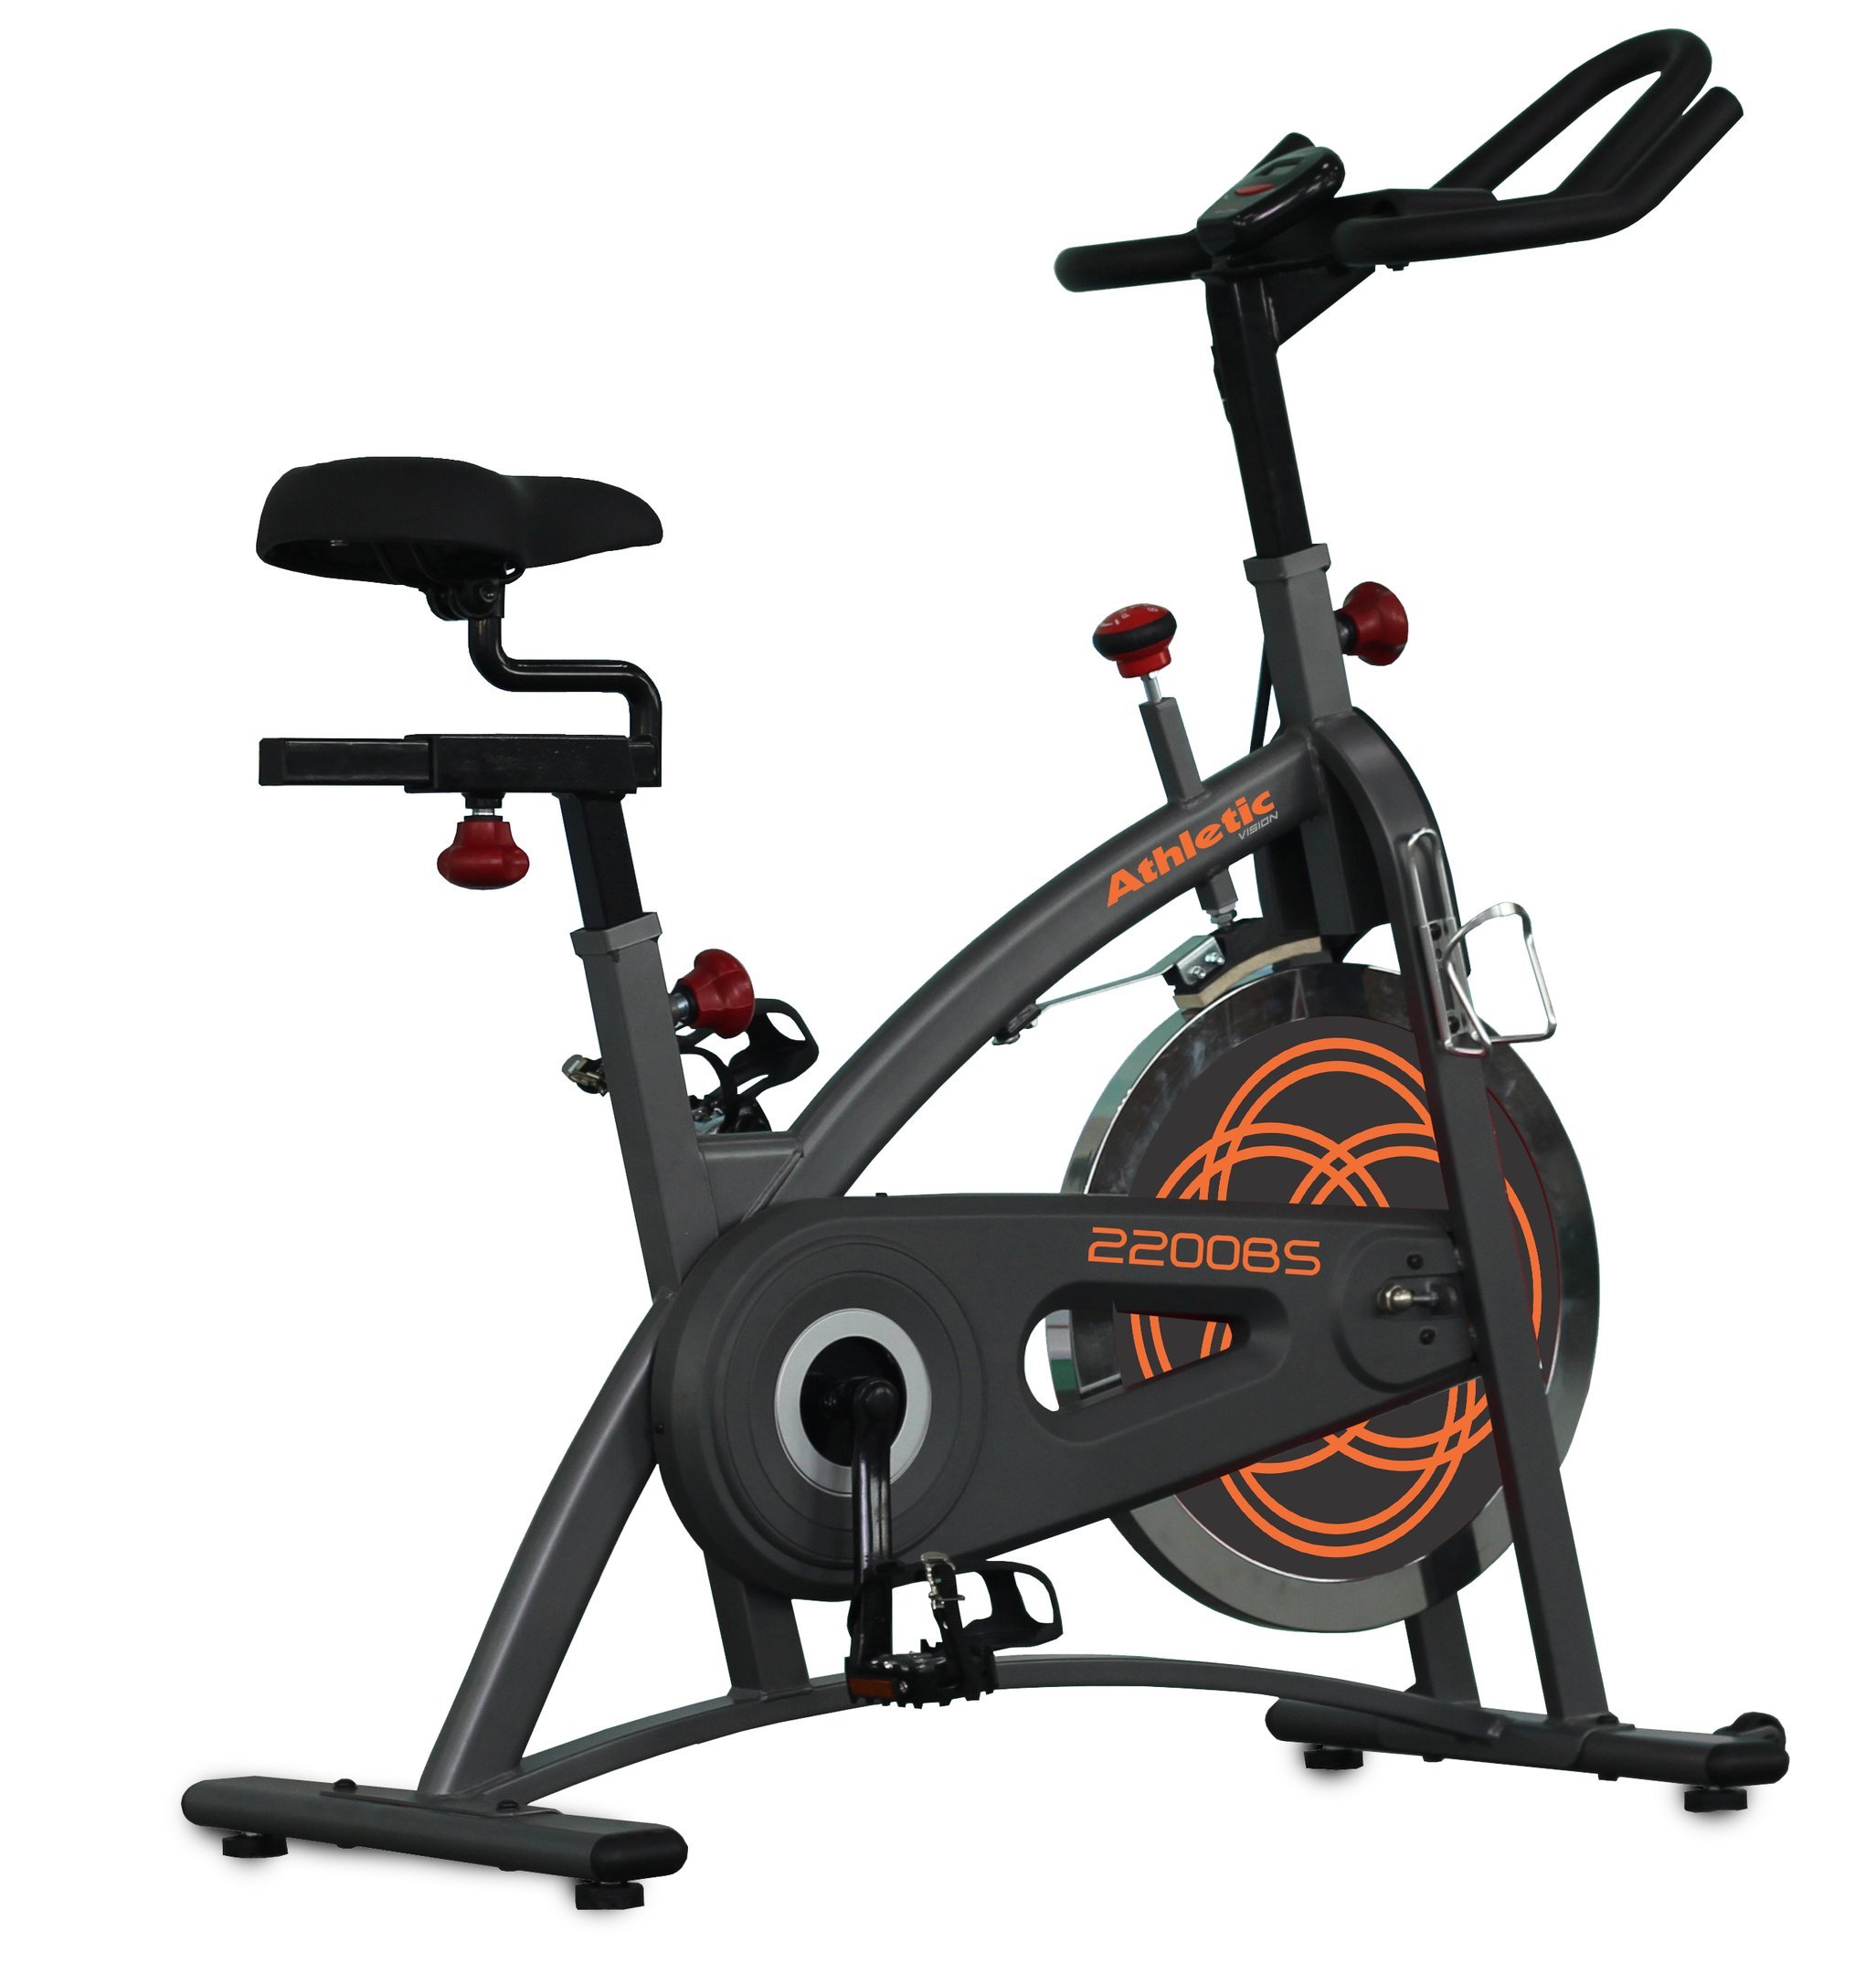 Bicicleta Spinning Athletic Advanced 2200bs Suporta 120kg - 1